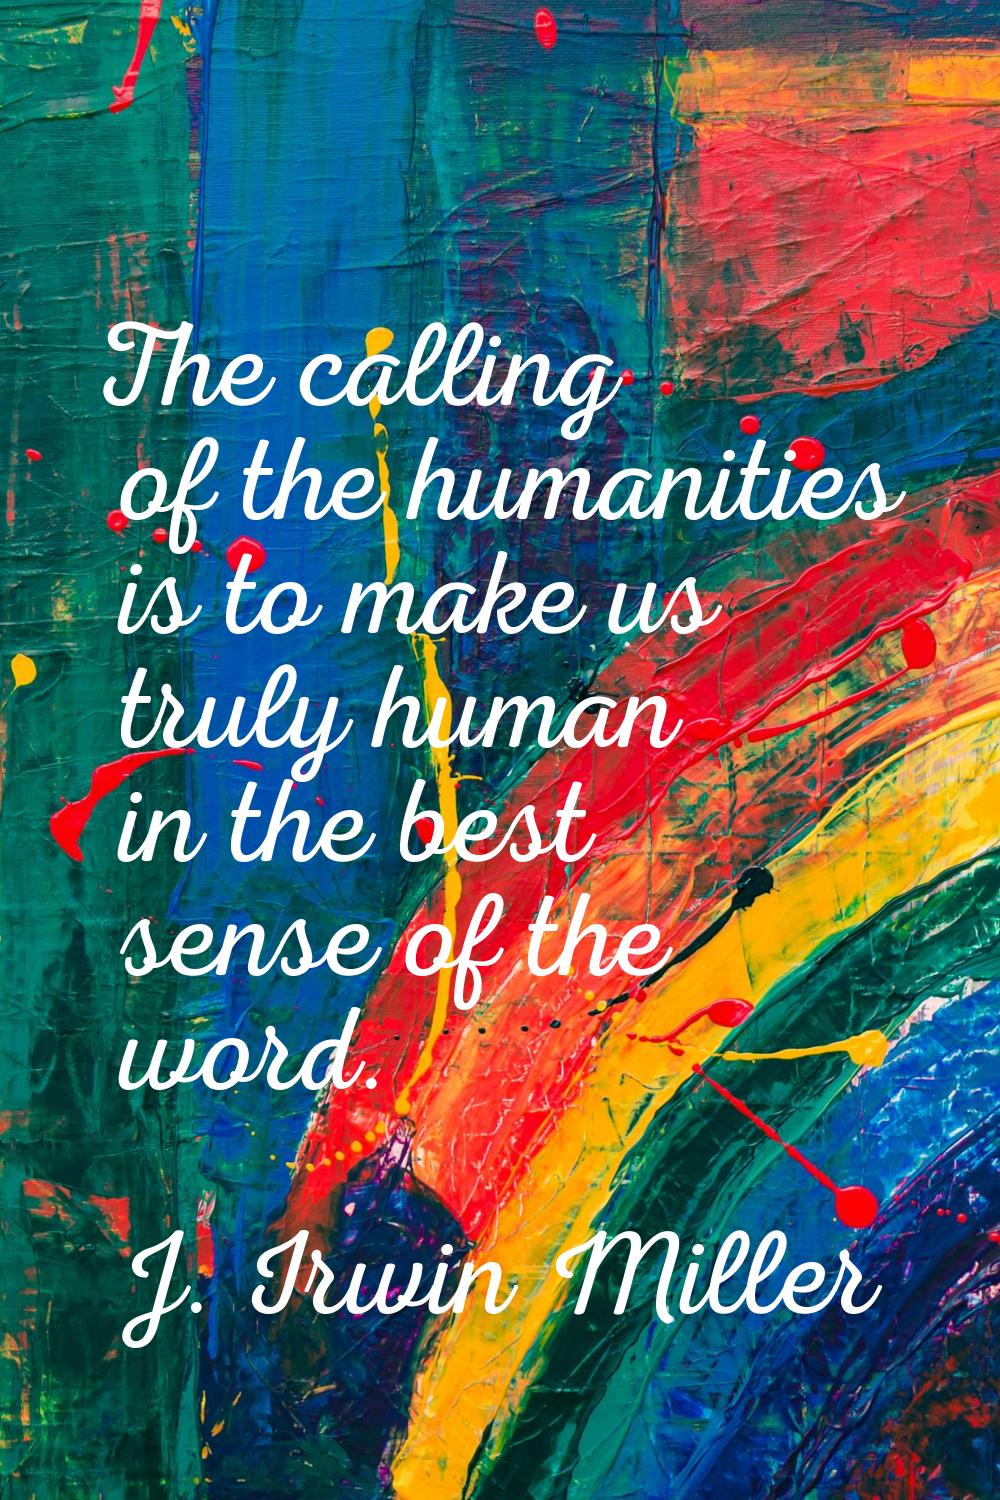 The calling of the humanities is to make us truly human in the best sense of the word.